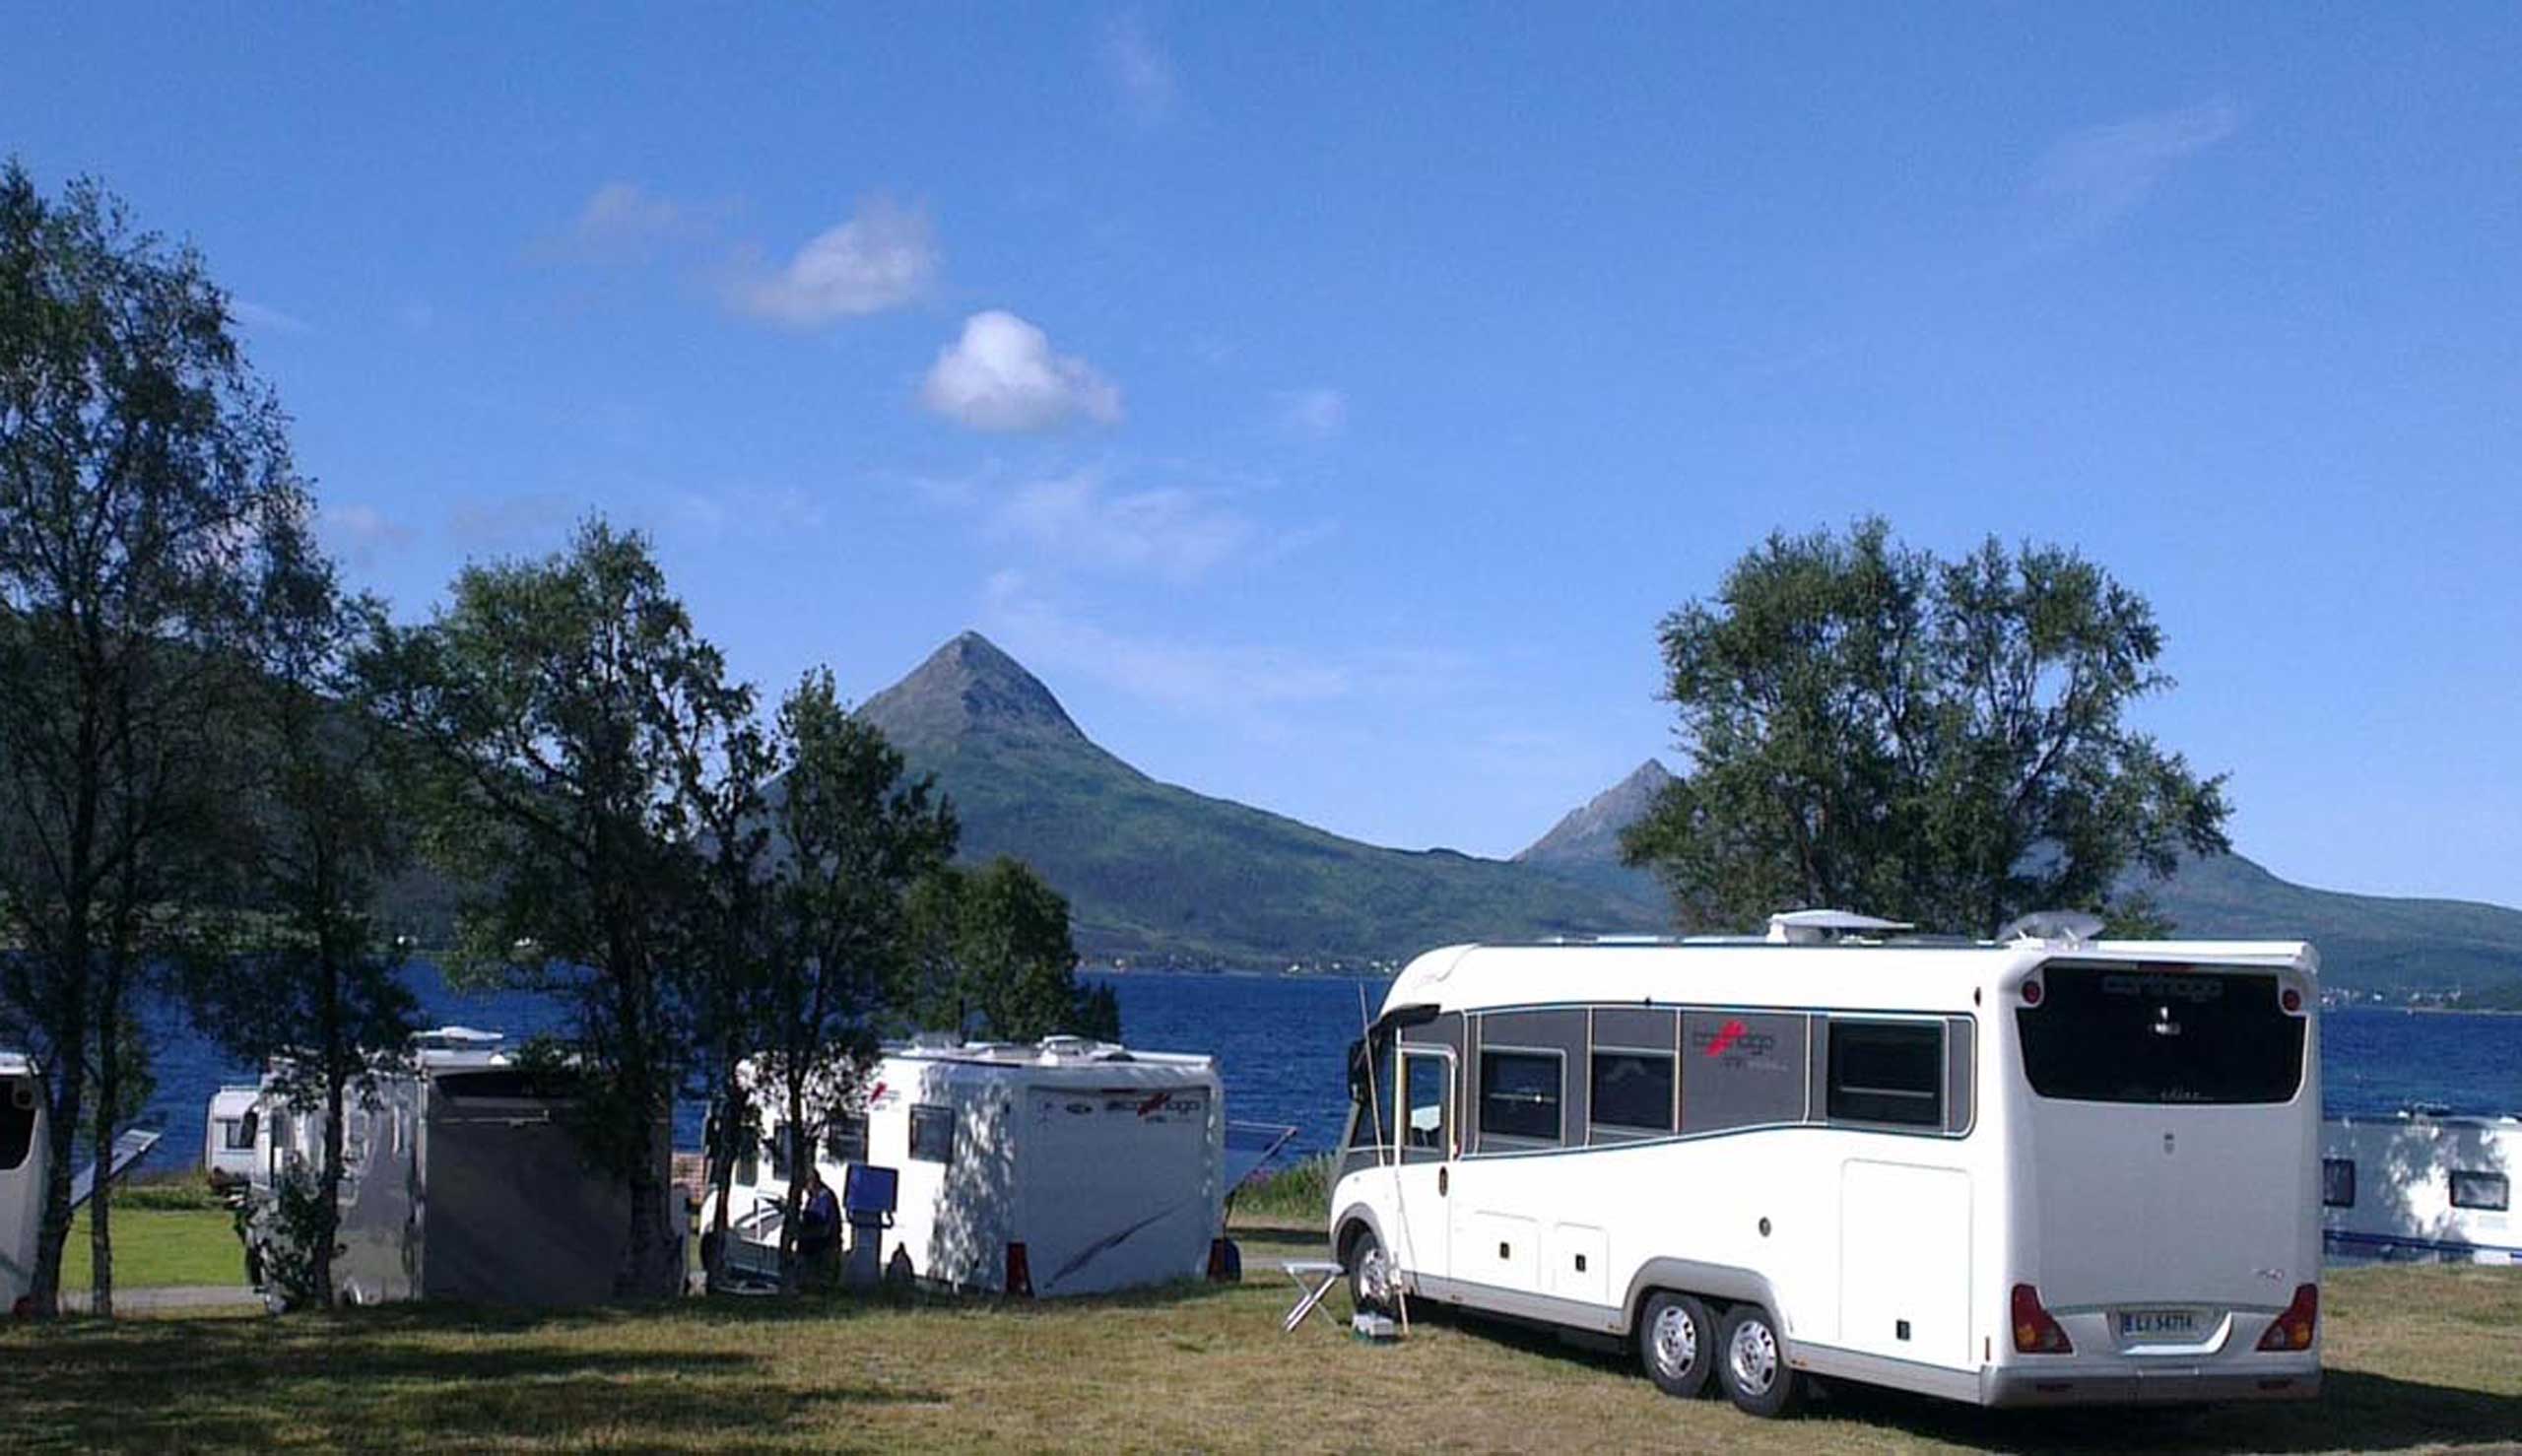 At Fjordbotn Camping, you are surrounded by beautiful views. Copyright: Fjordbotn Camping